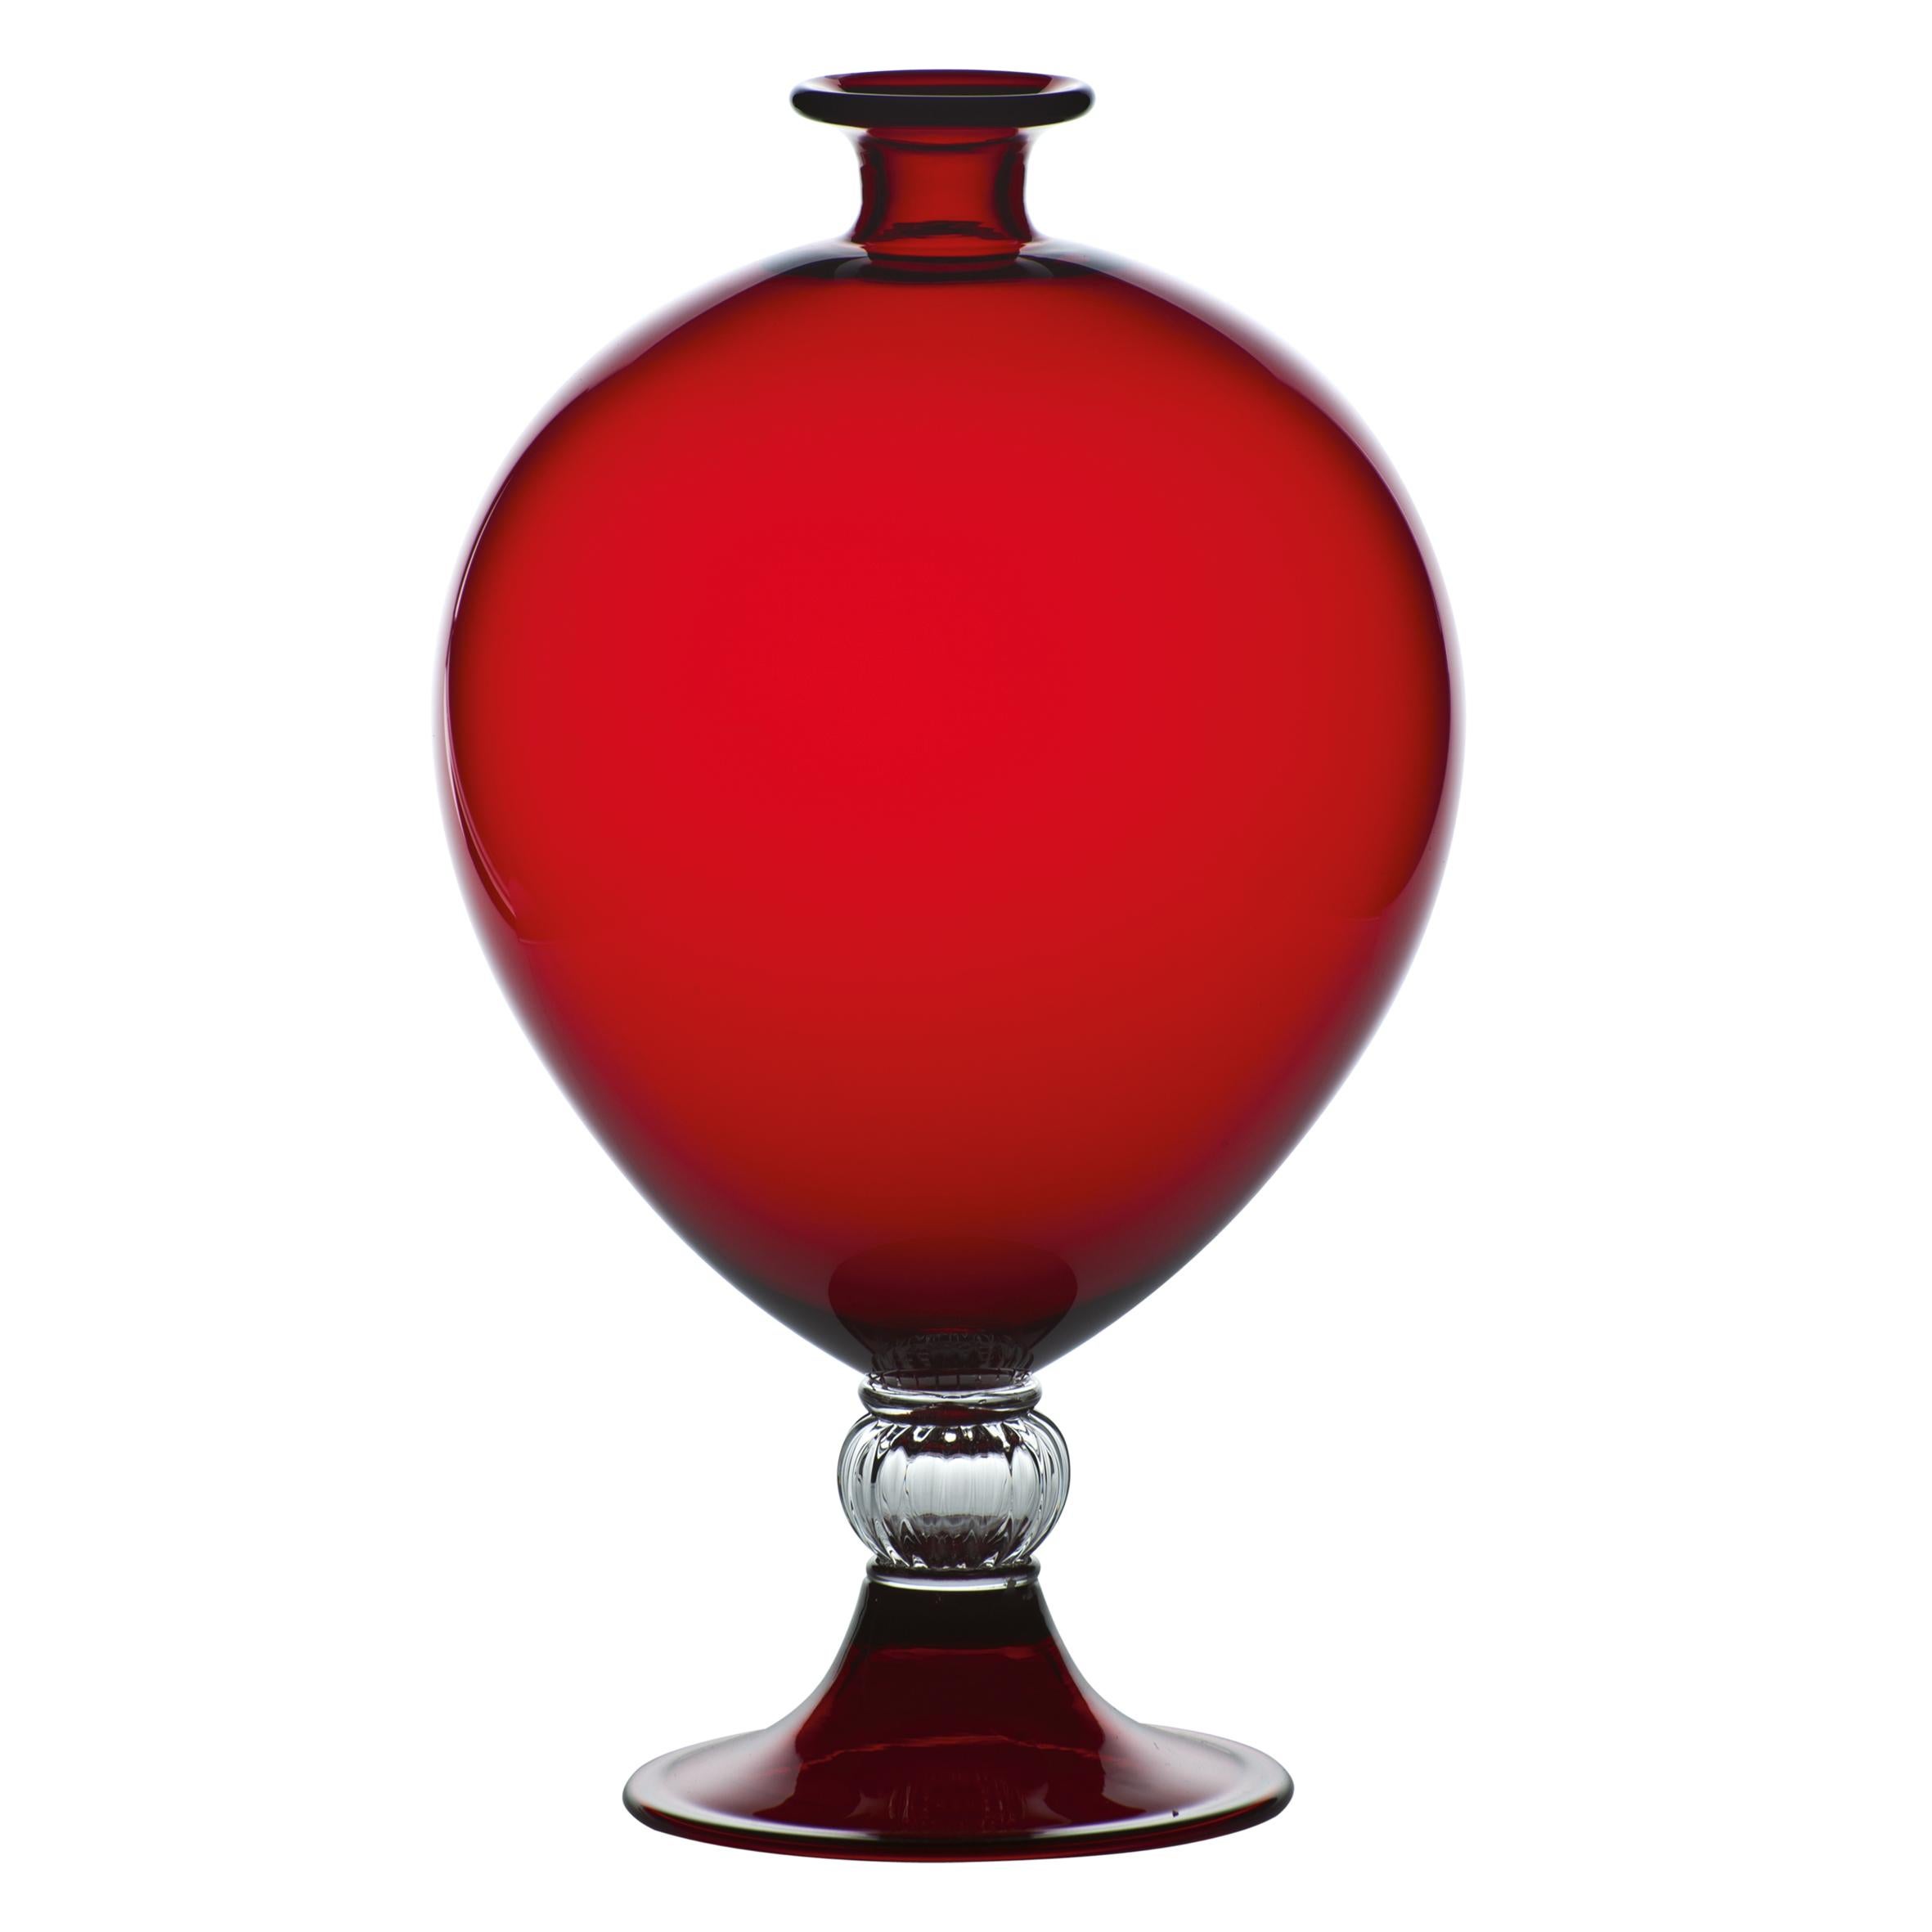 Venini Veronese Glass Vase in Red and Crystal by Vittorio Zecchin